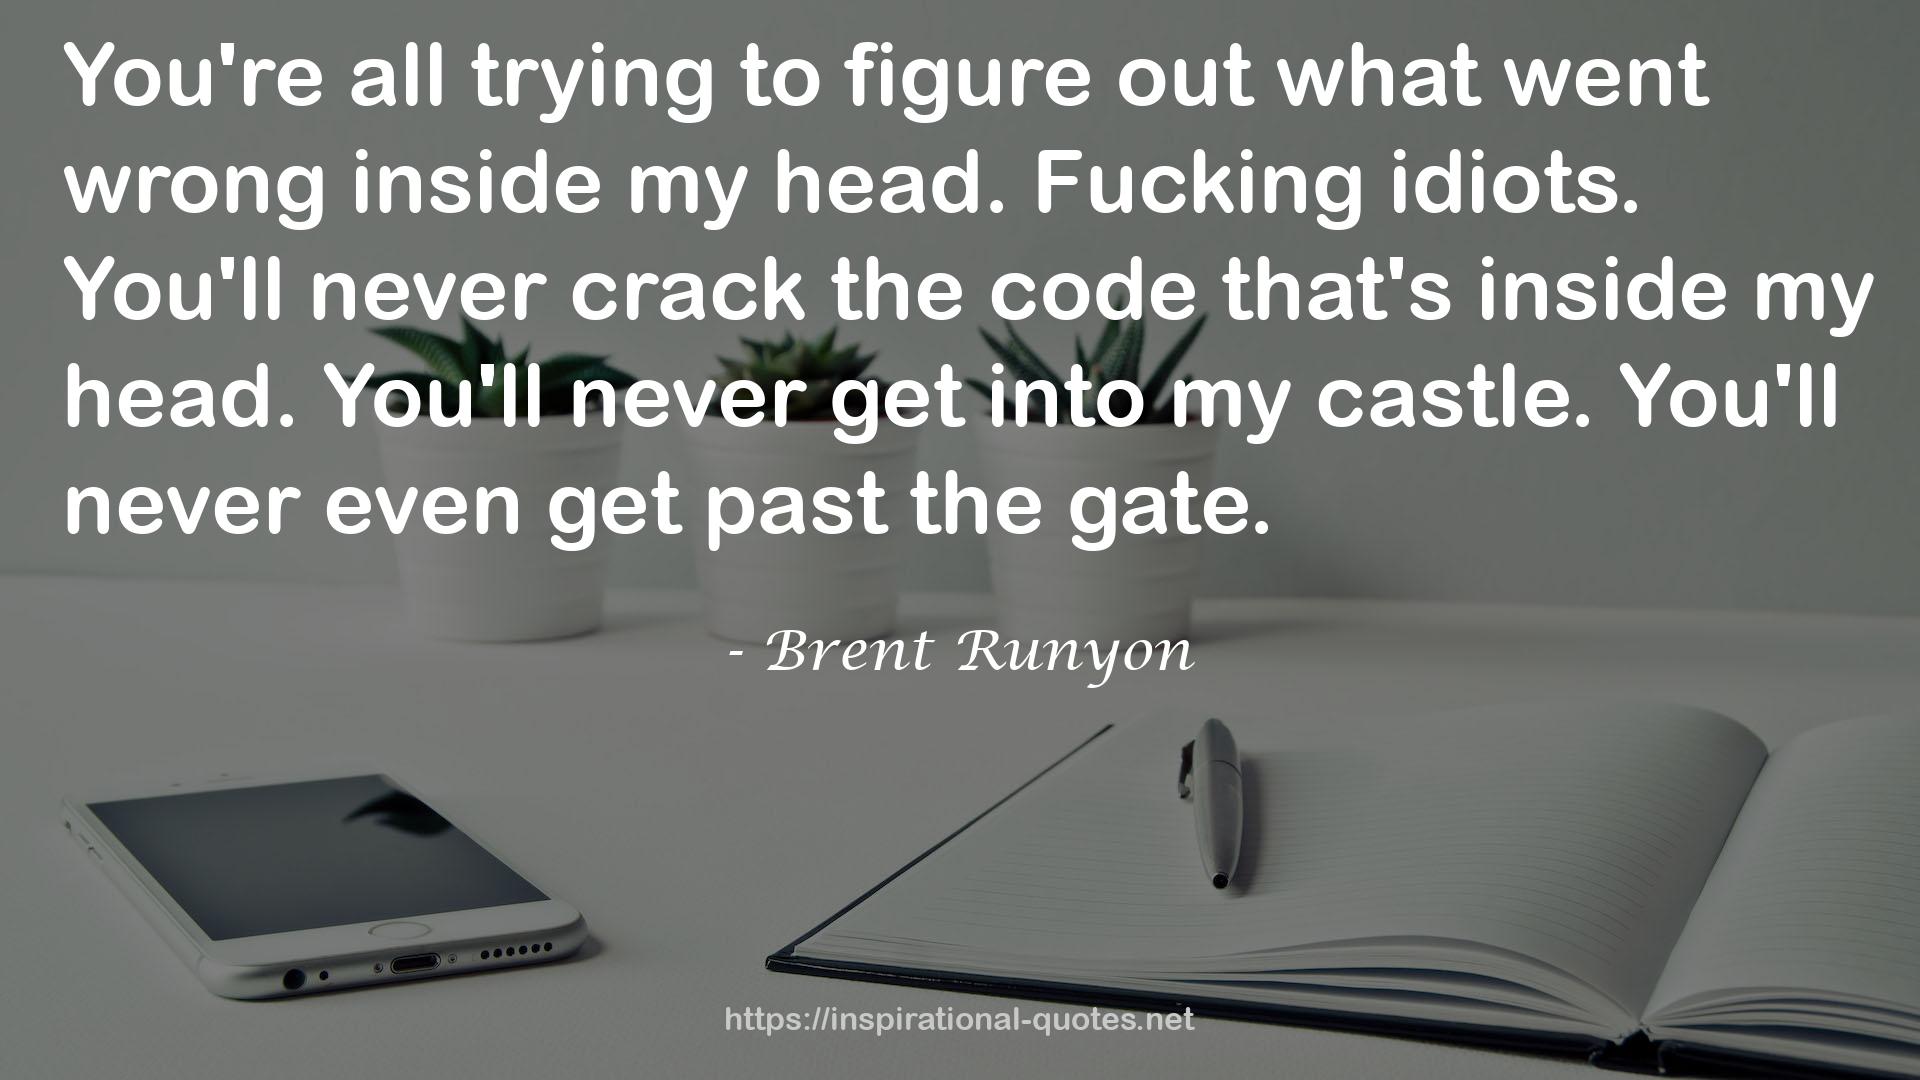 Brent Runyon QUOTES